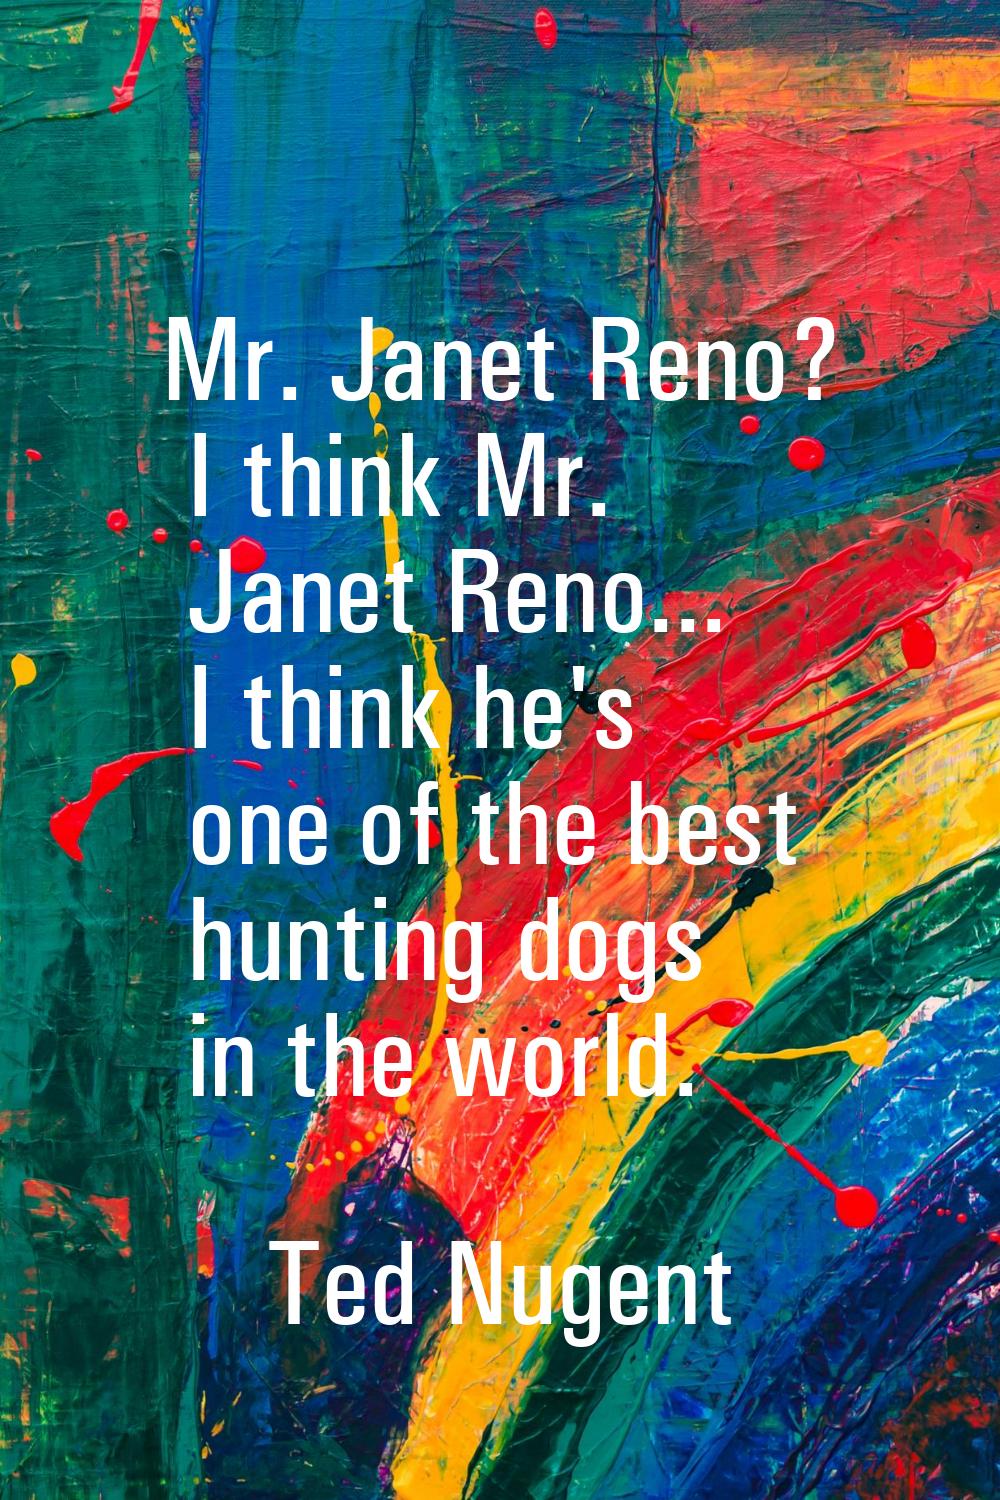 Mr. Janet Reno? I think Mr. Janet Reno... I think he's one of the best hunting dogs in the world.